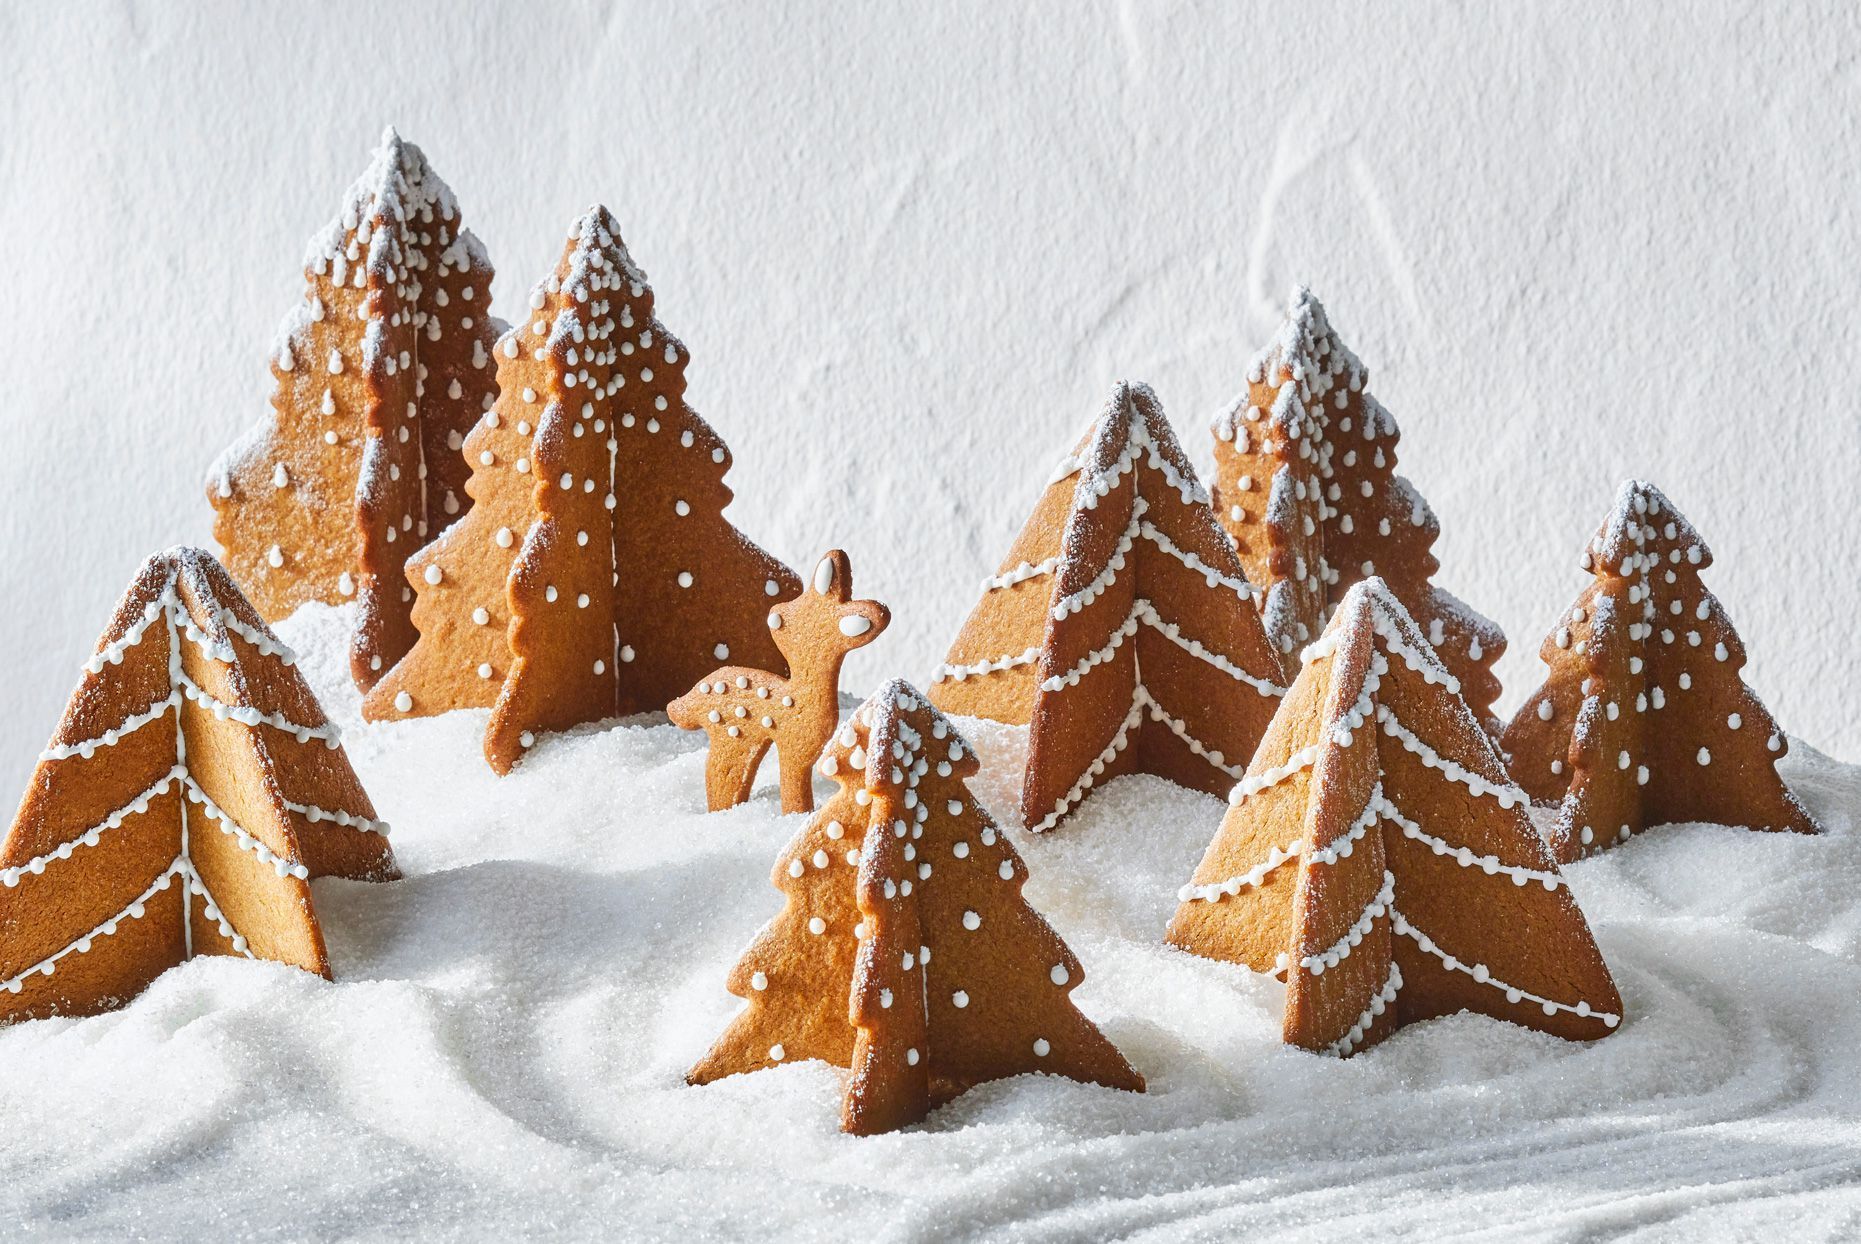 This photo shows some cookies made of ginger bread shaped like trees with a snowy background.